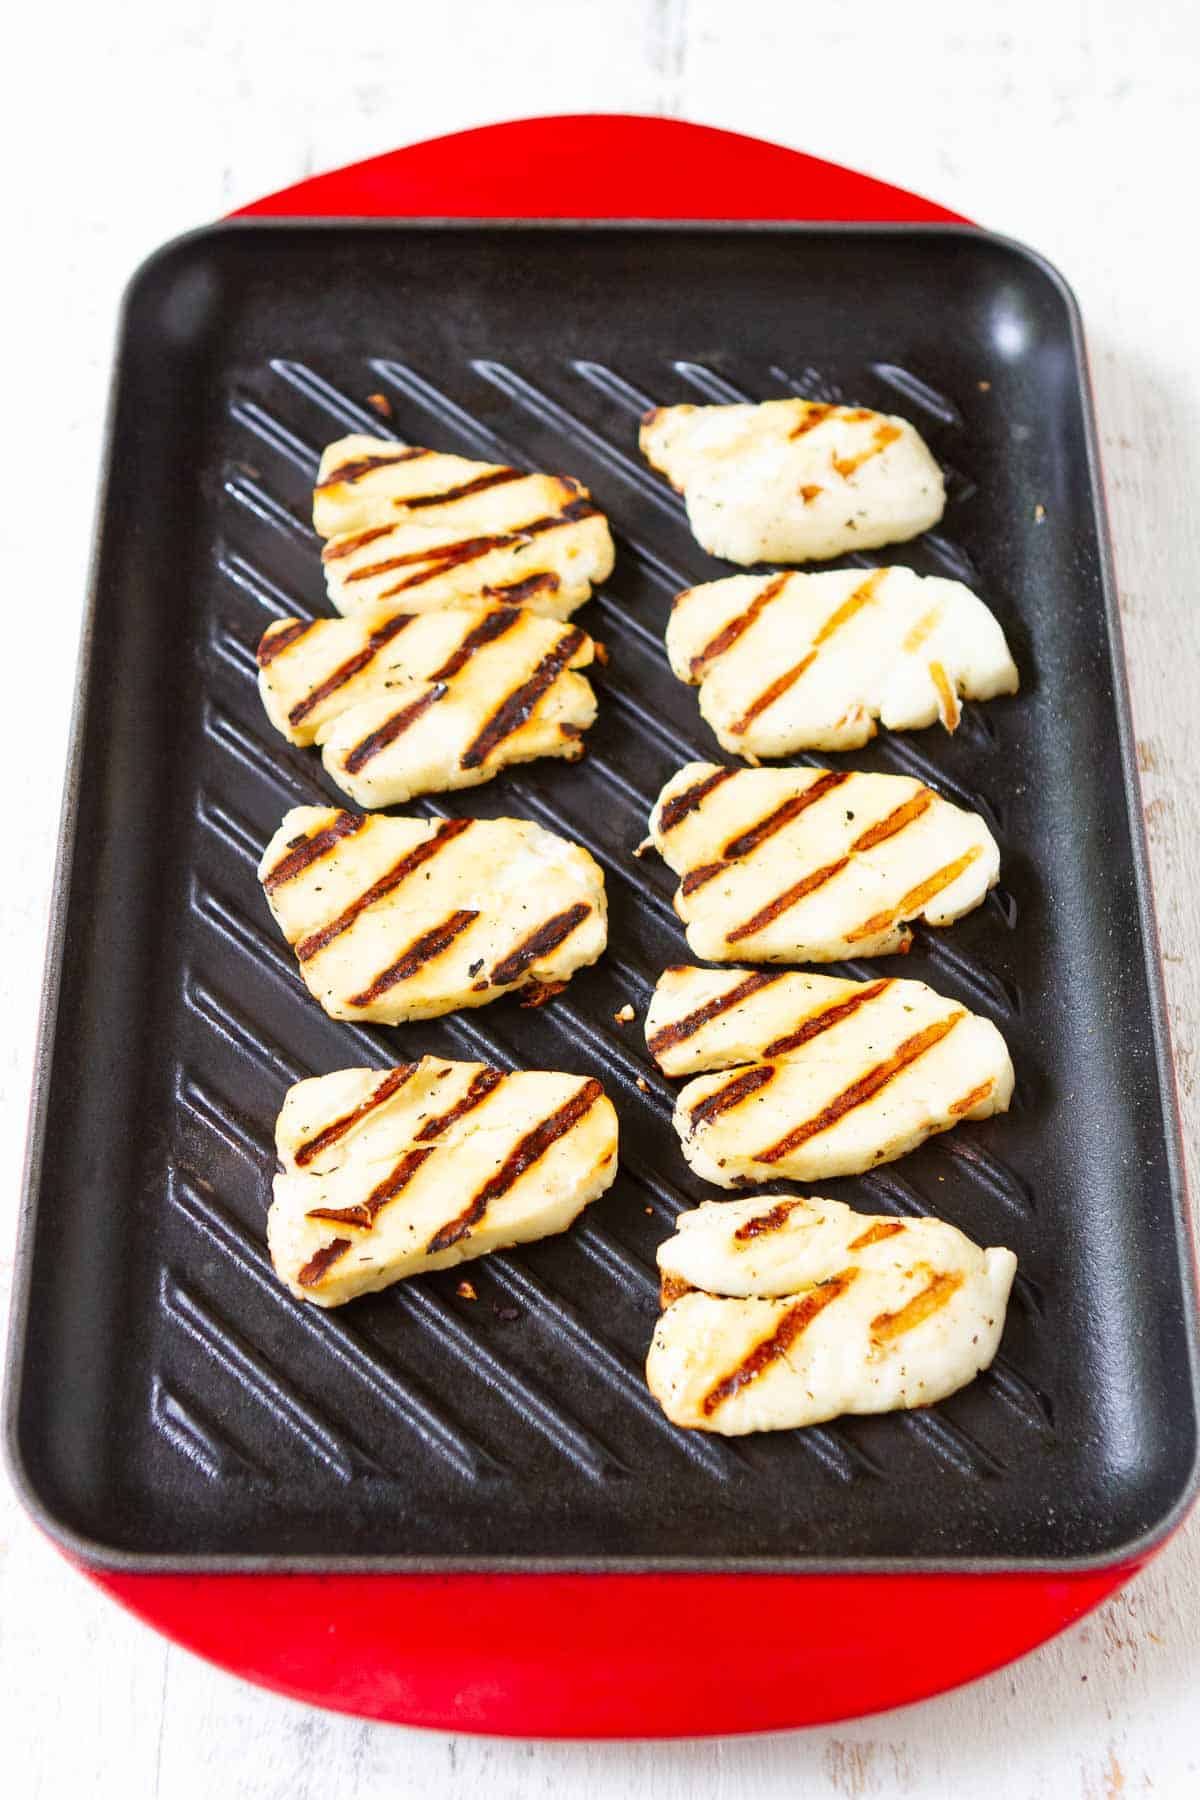 This grilled halloumi cheese recipe takes just 10 minutes to make! Serve the cheese with baguette slices, in a salad or alongside grilled meat and vegetables. | Recipes | Appetizer | Vegetarian